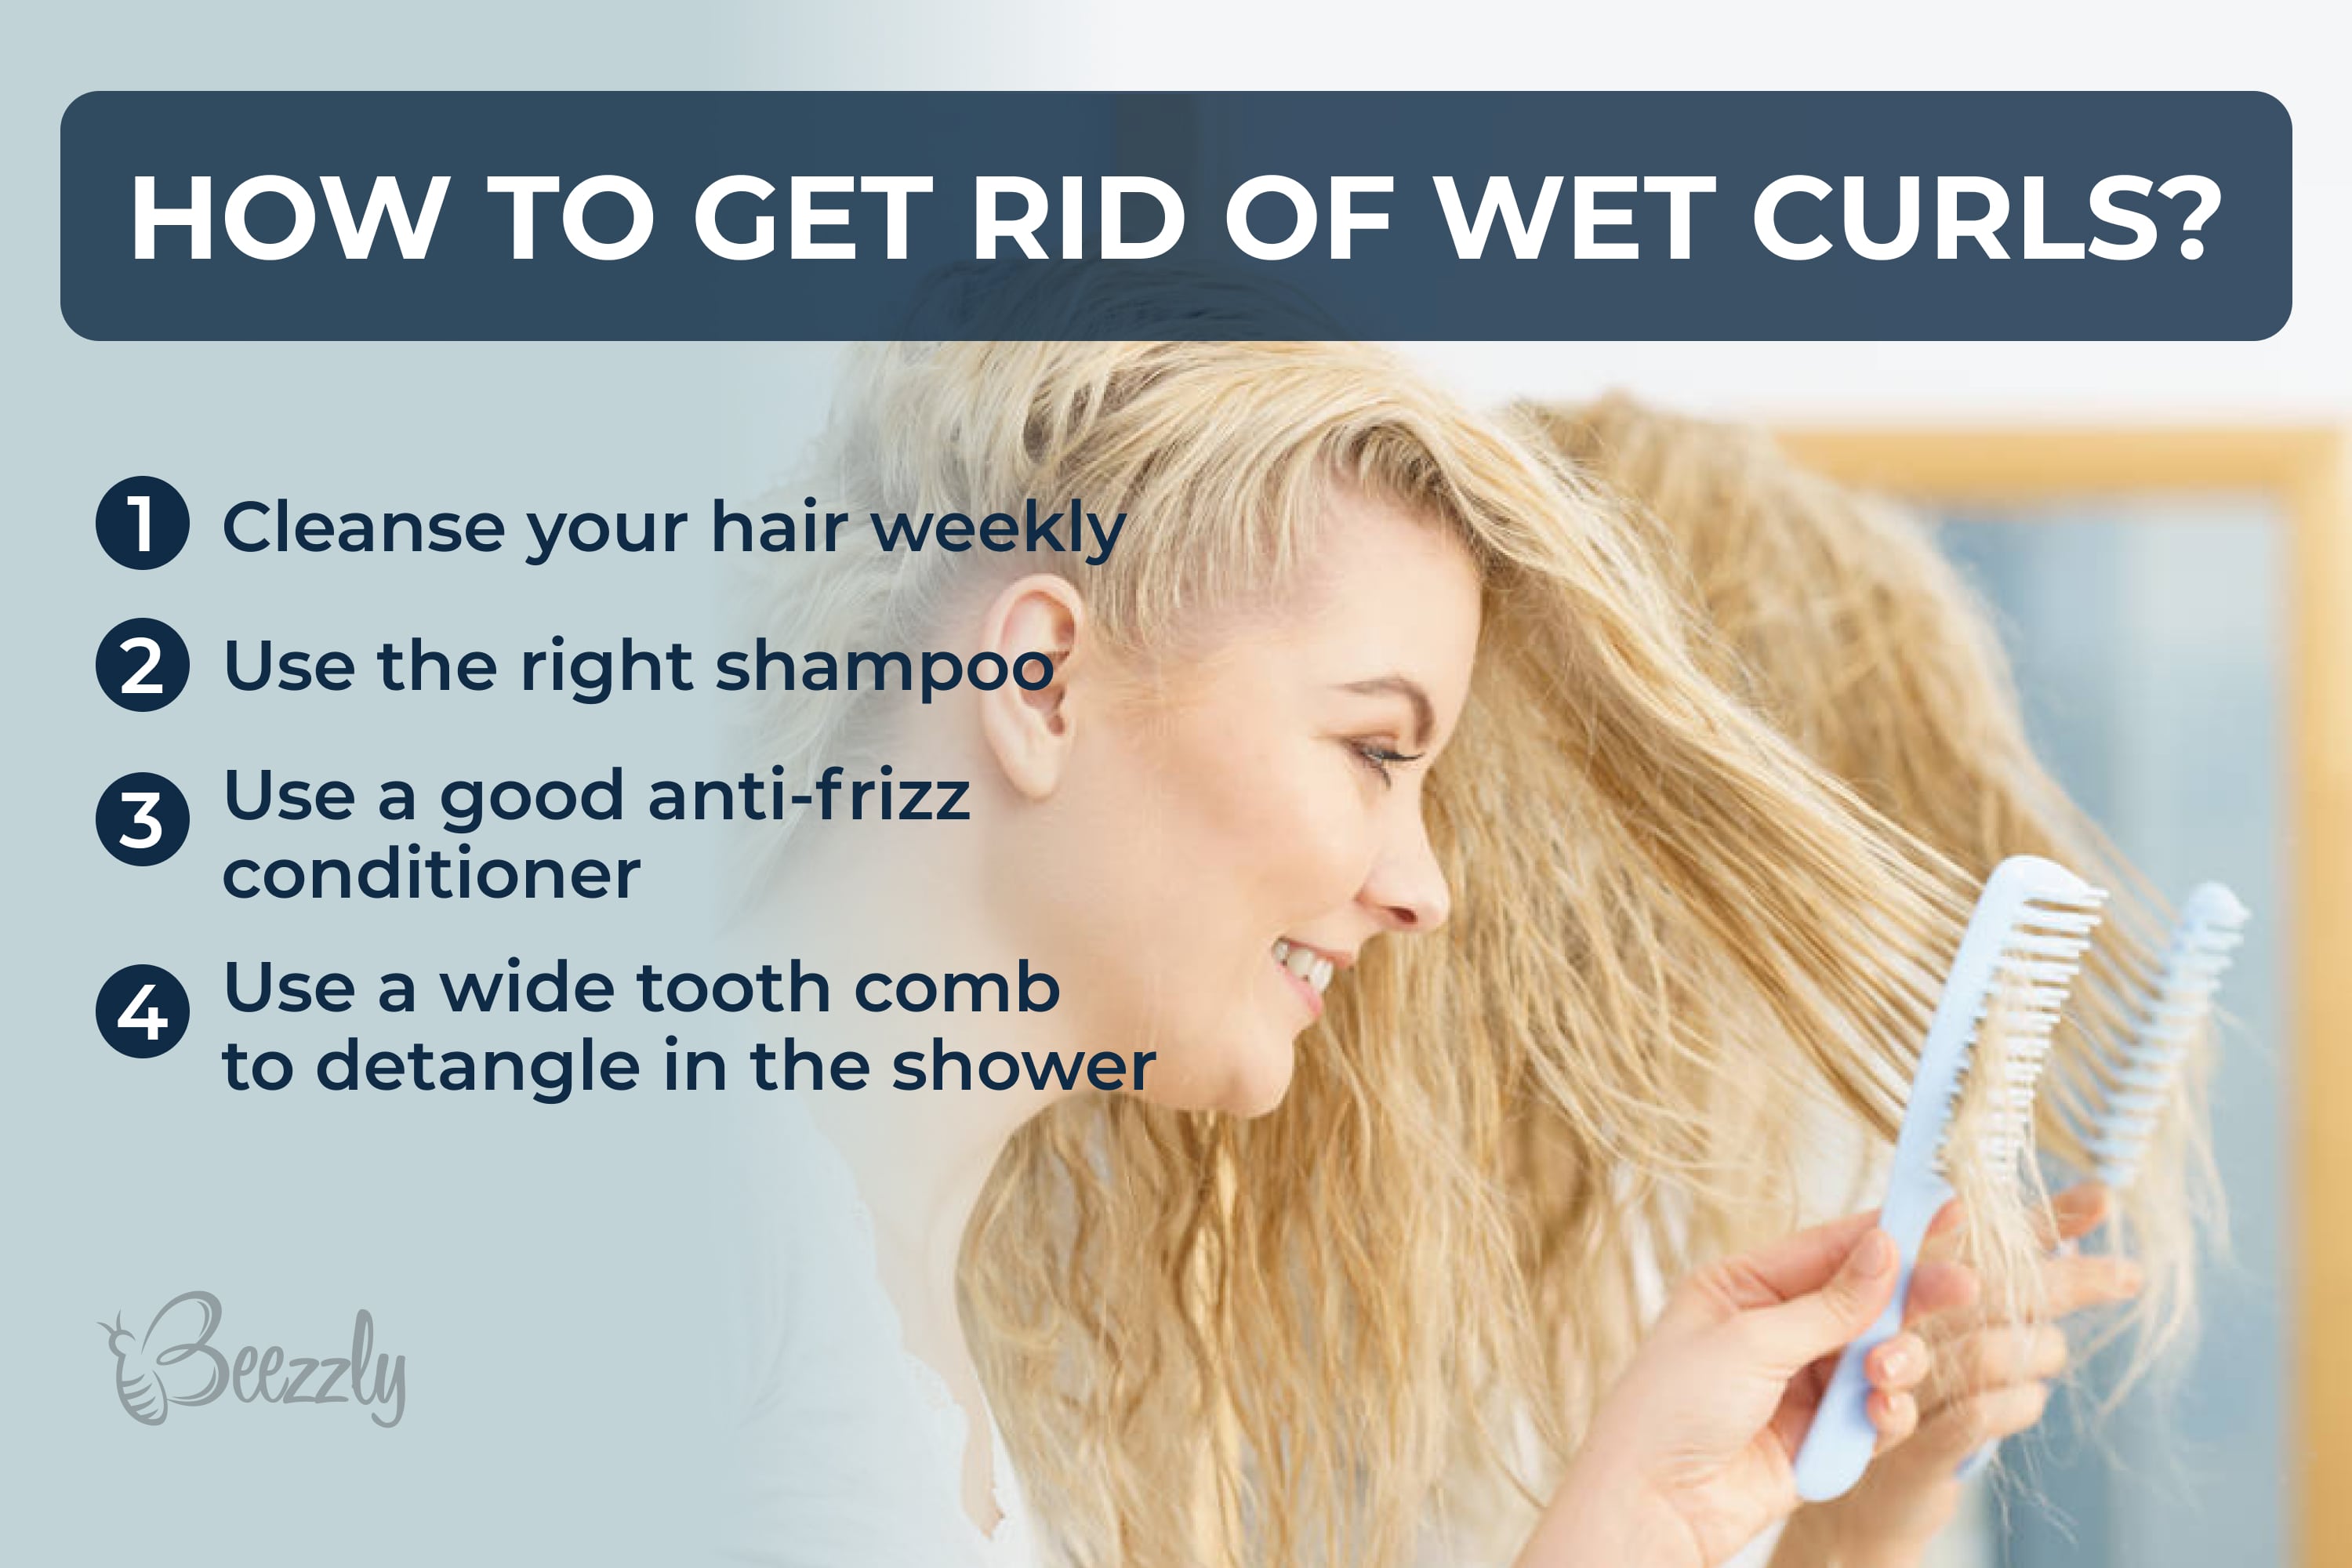 How to get rid of wet curls